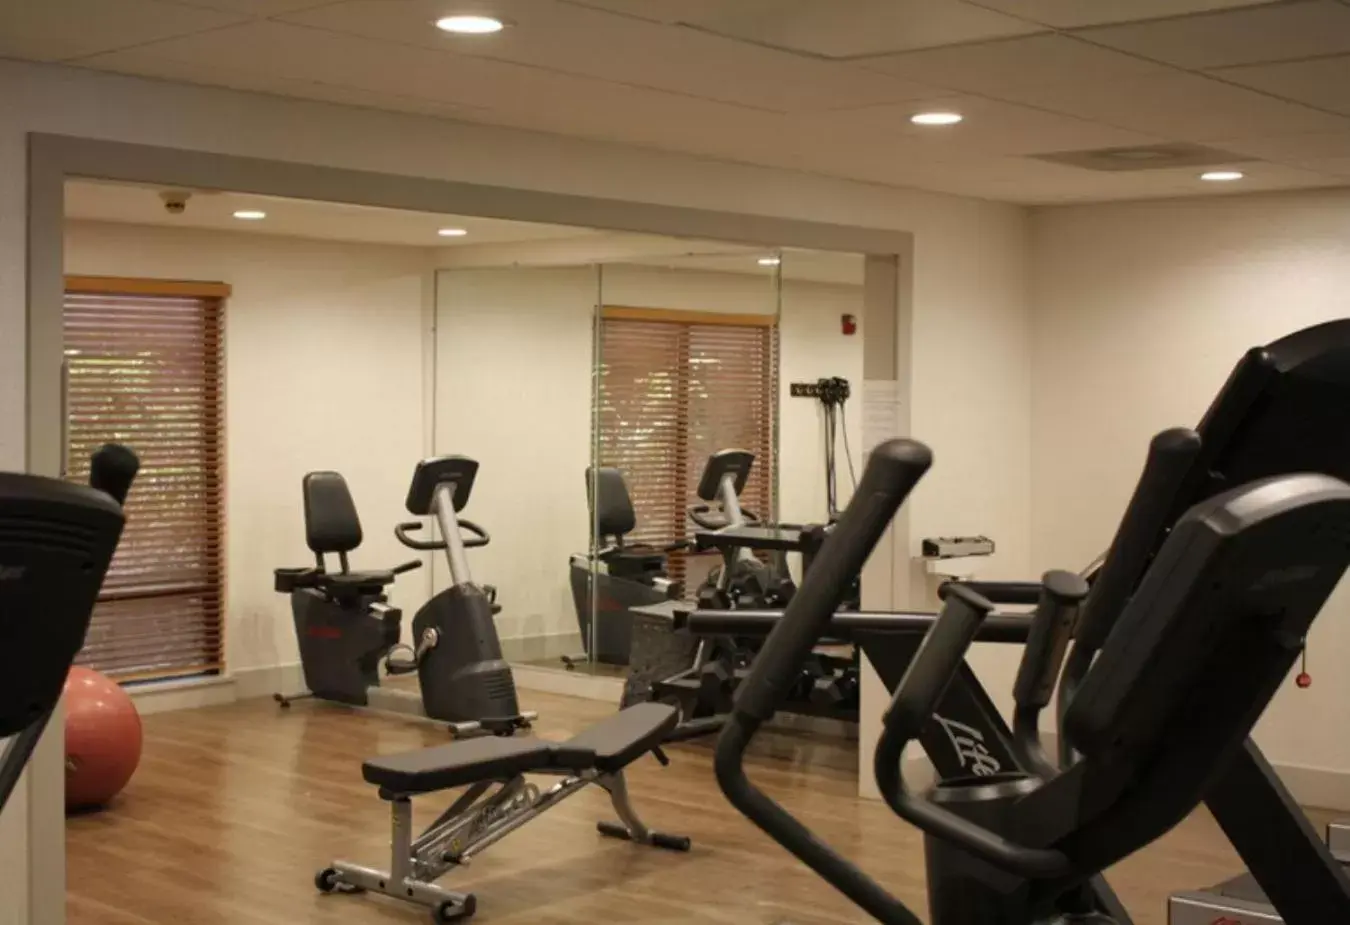 Fitness centre/facilities, Fitness Center/Facilities in Holiday Inn Express Atlanta - Northeast I-85 - Clairmont Road, an IHG Hotel